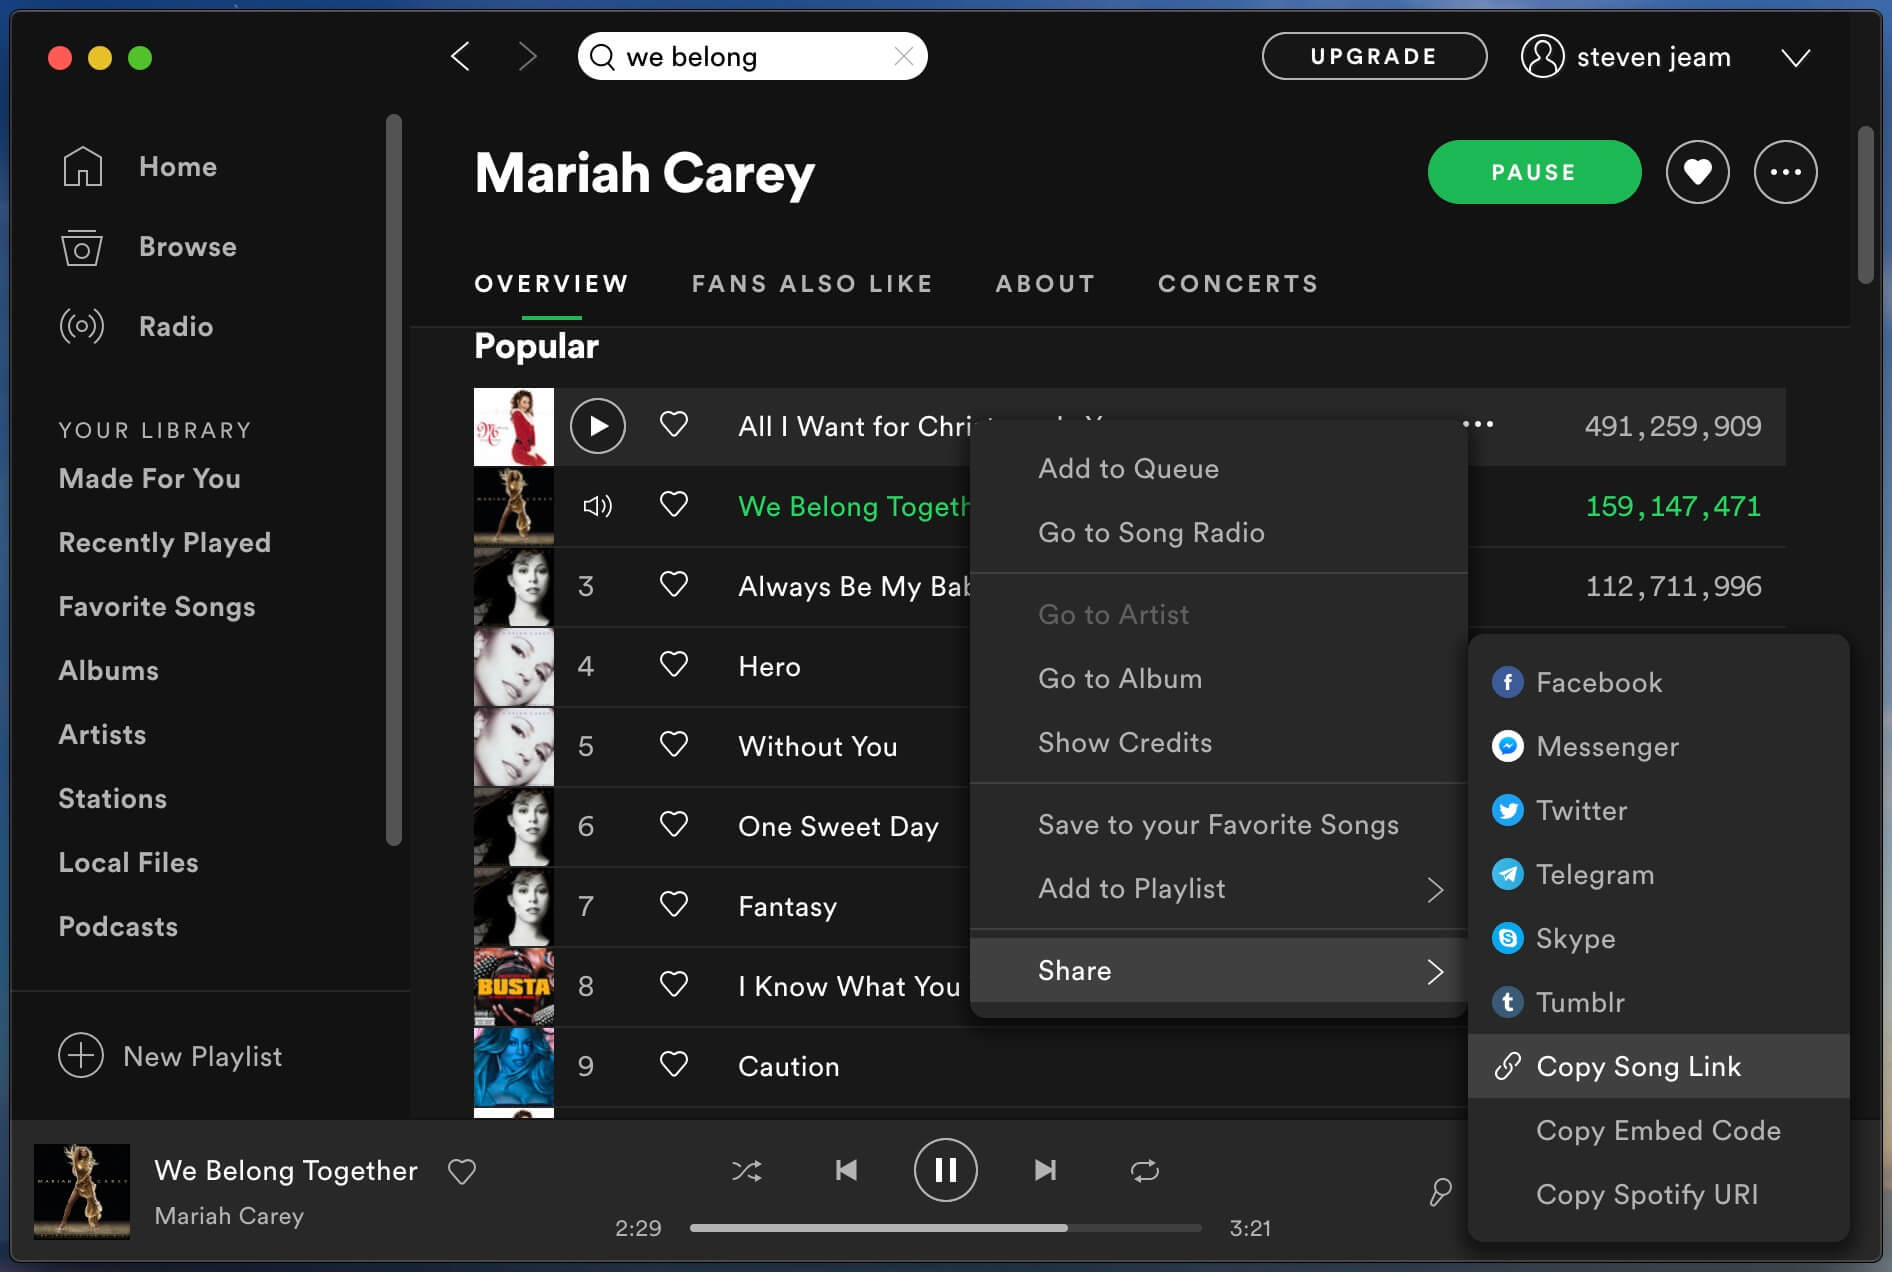 Download Spotify Videos With Link